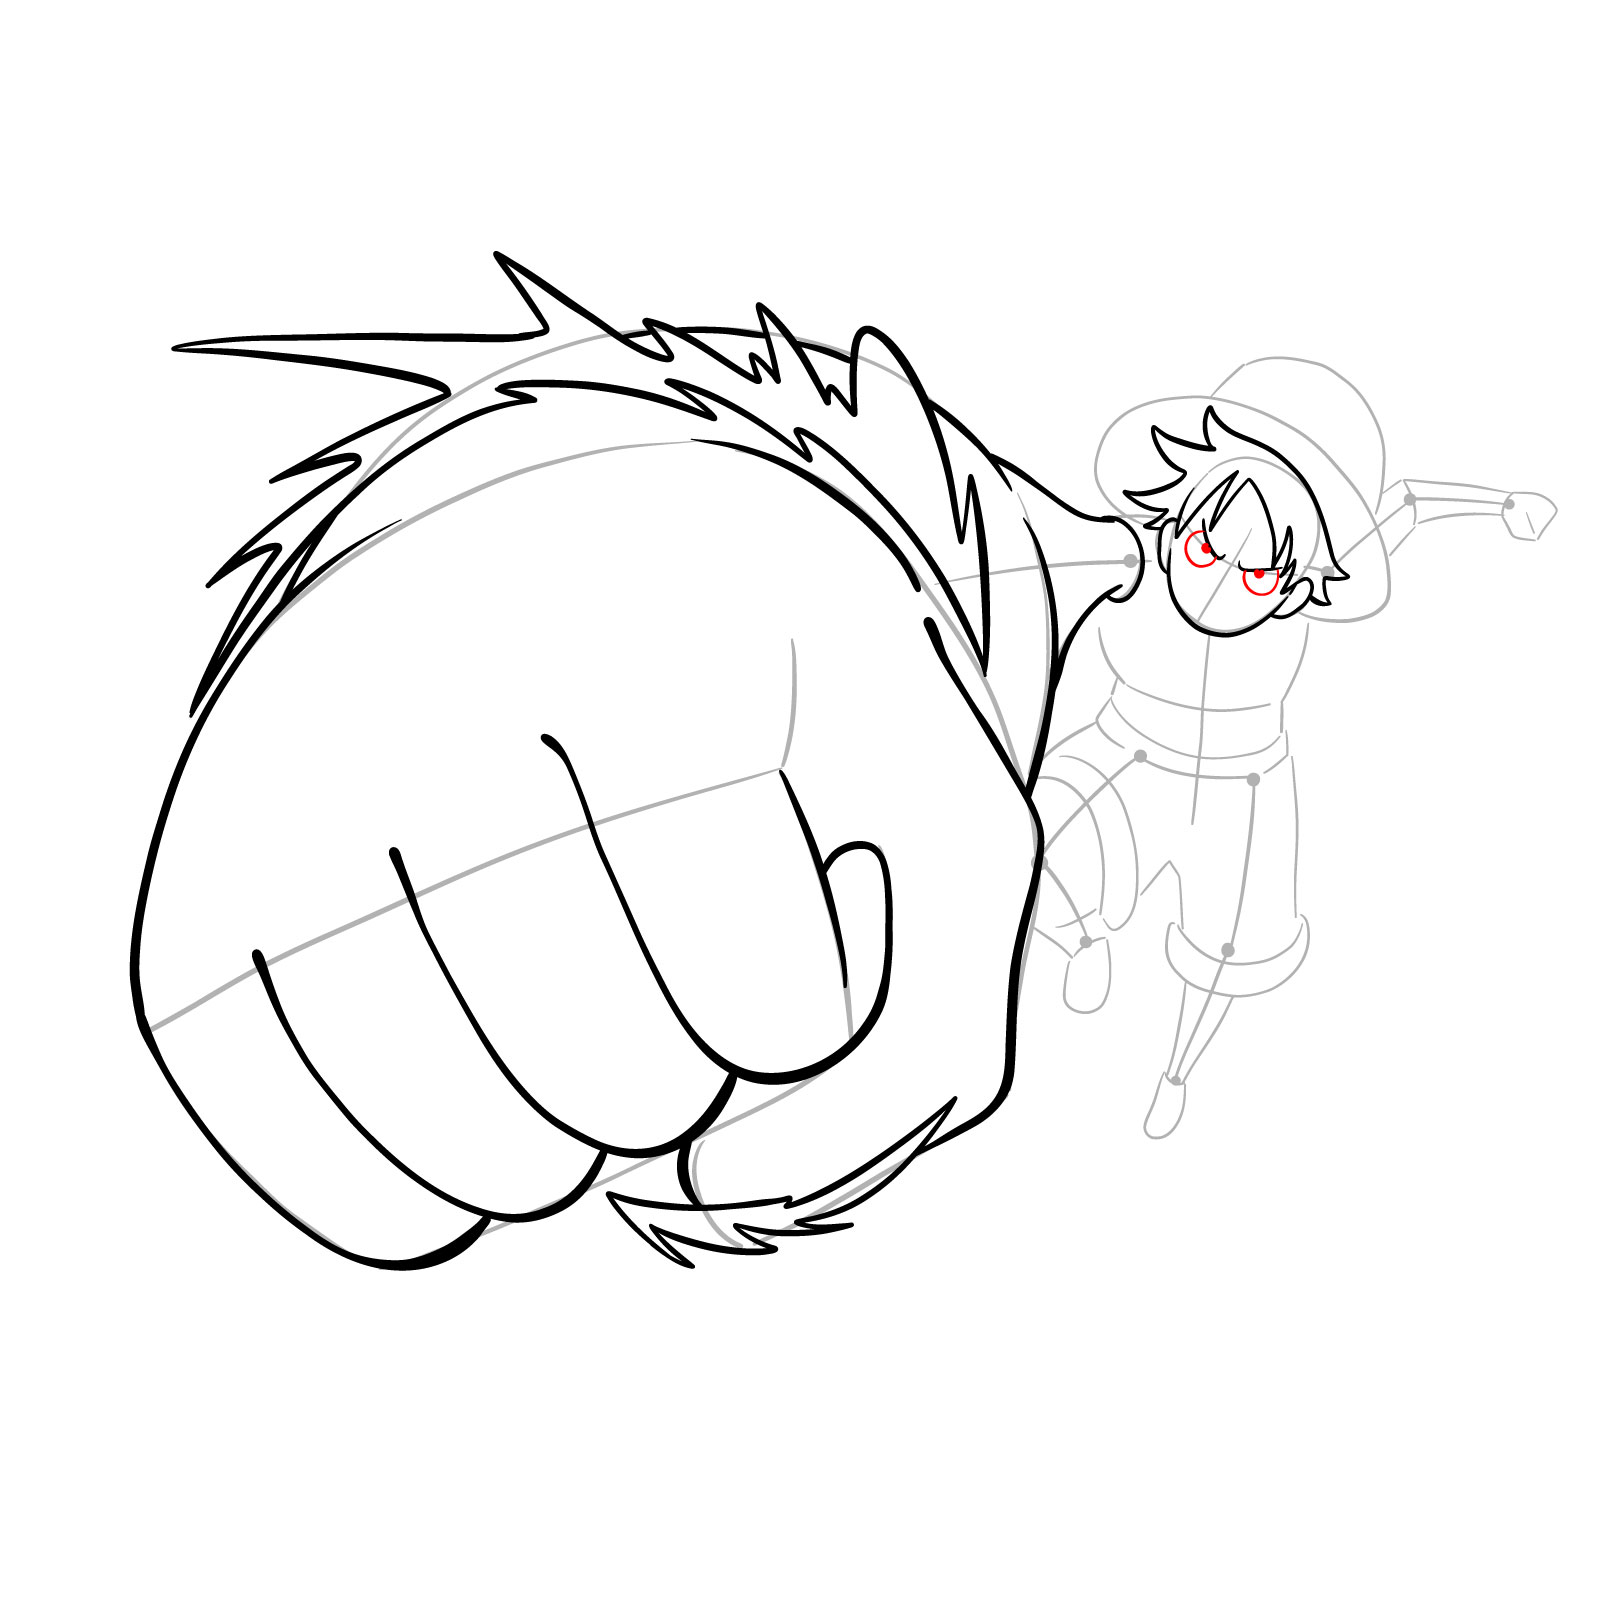 How to draw Luffy's Gear 3 without haki - step 18